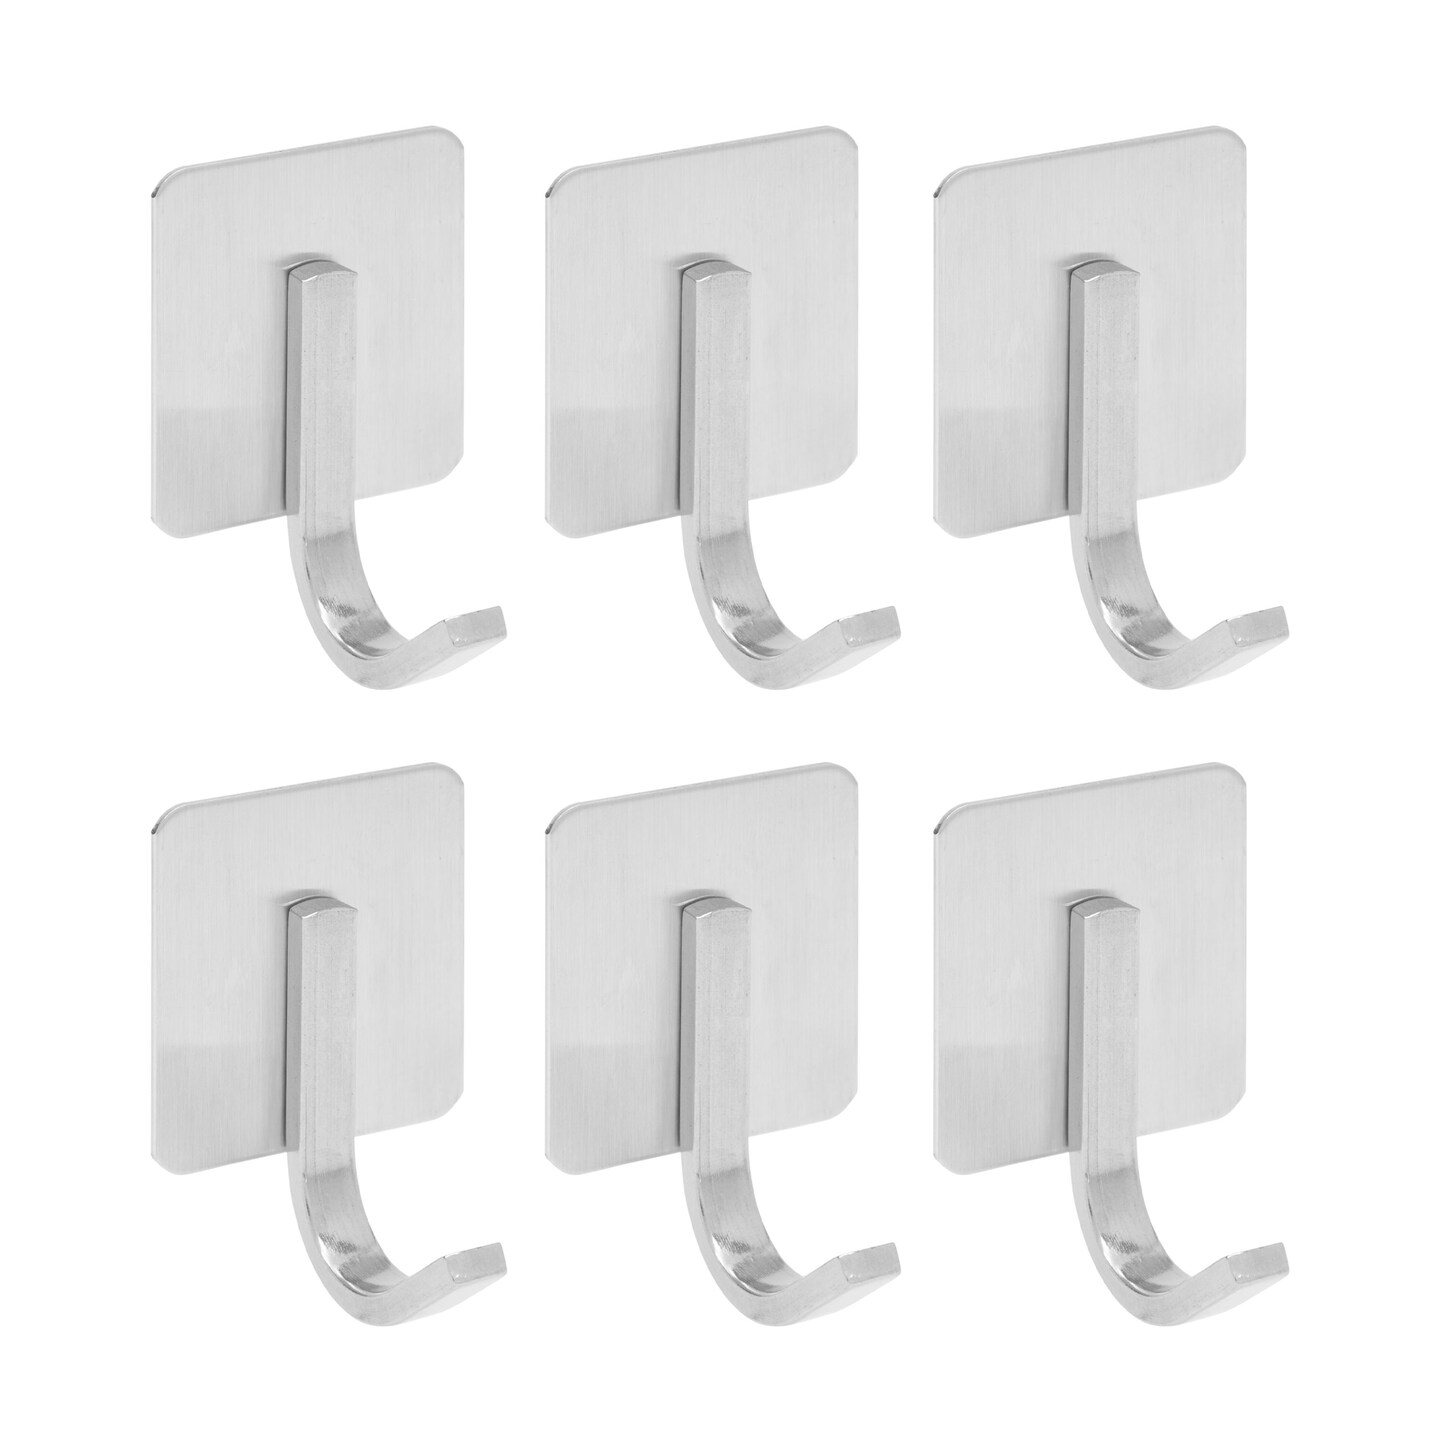 J Shape Adhesive Wall Hooks, Heavy Duty Stainless Steel for Hanging (2.4  In, 6 Pack)